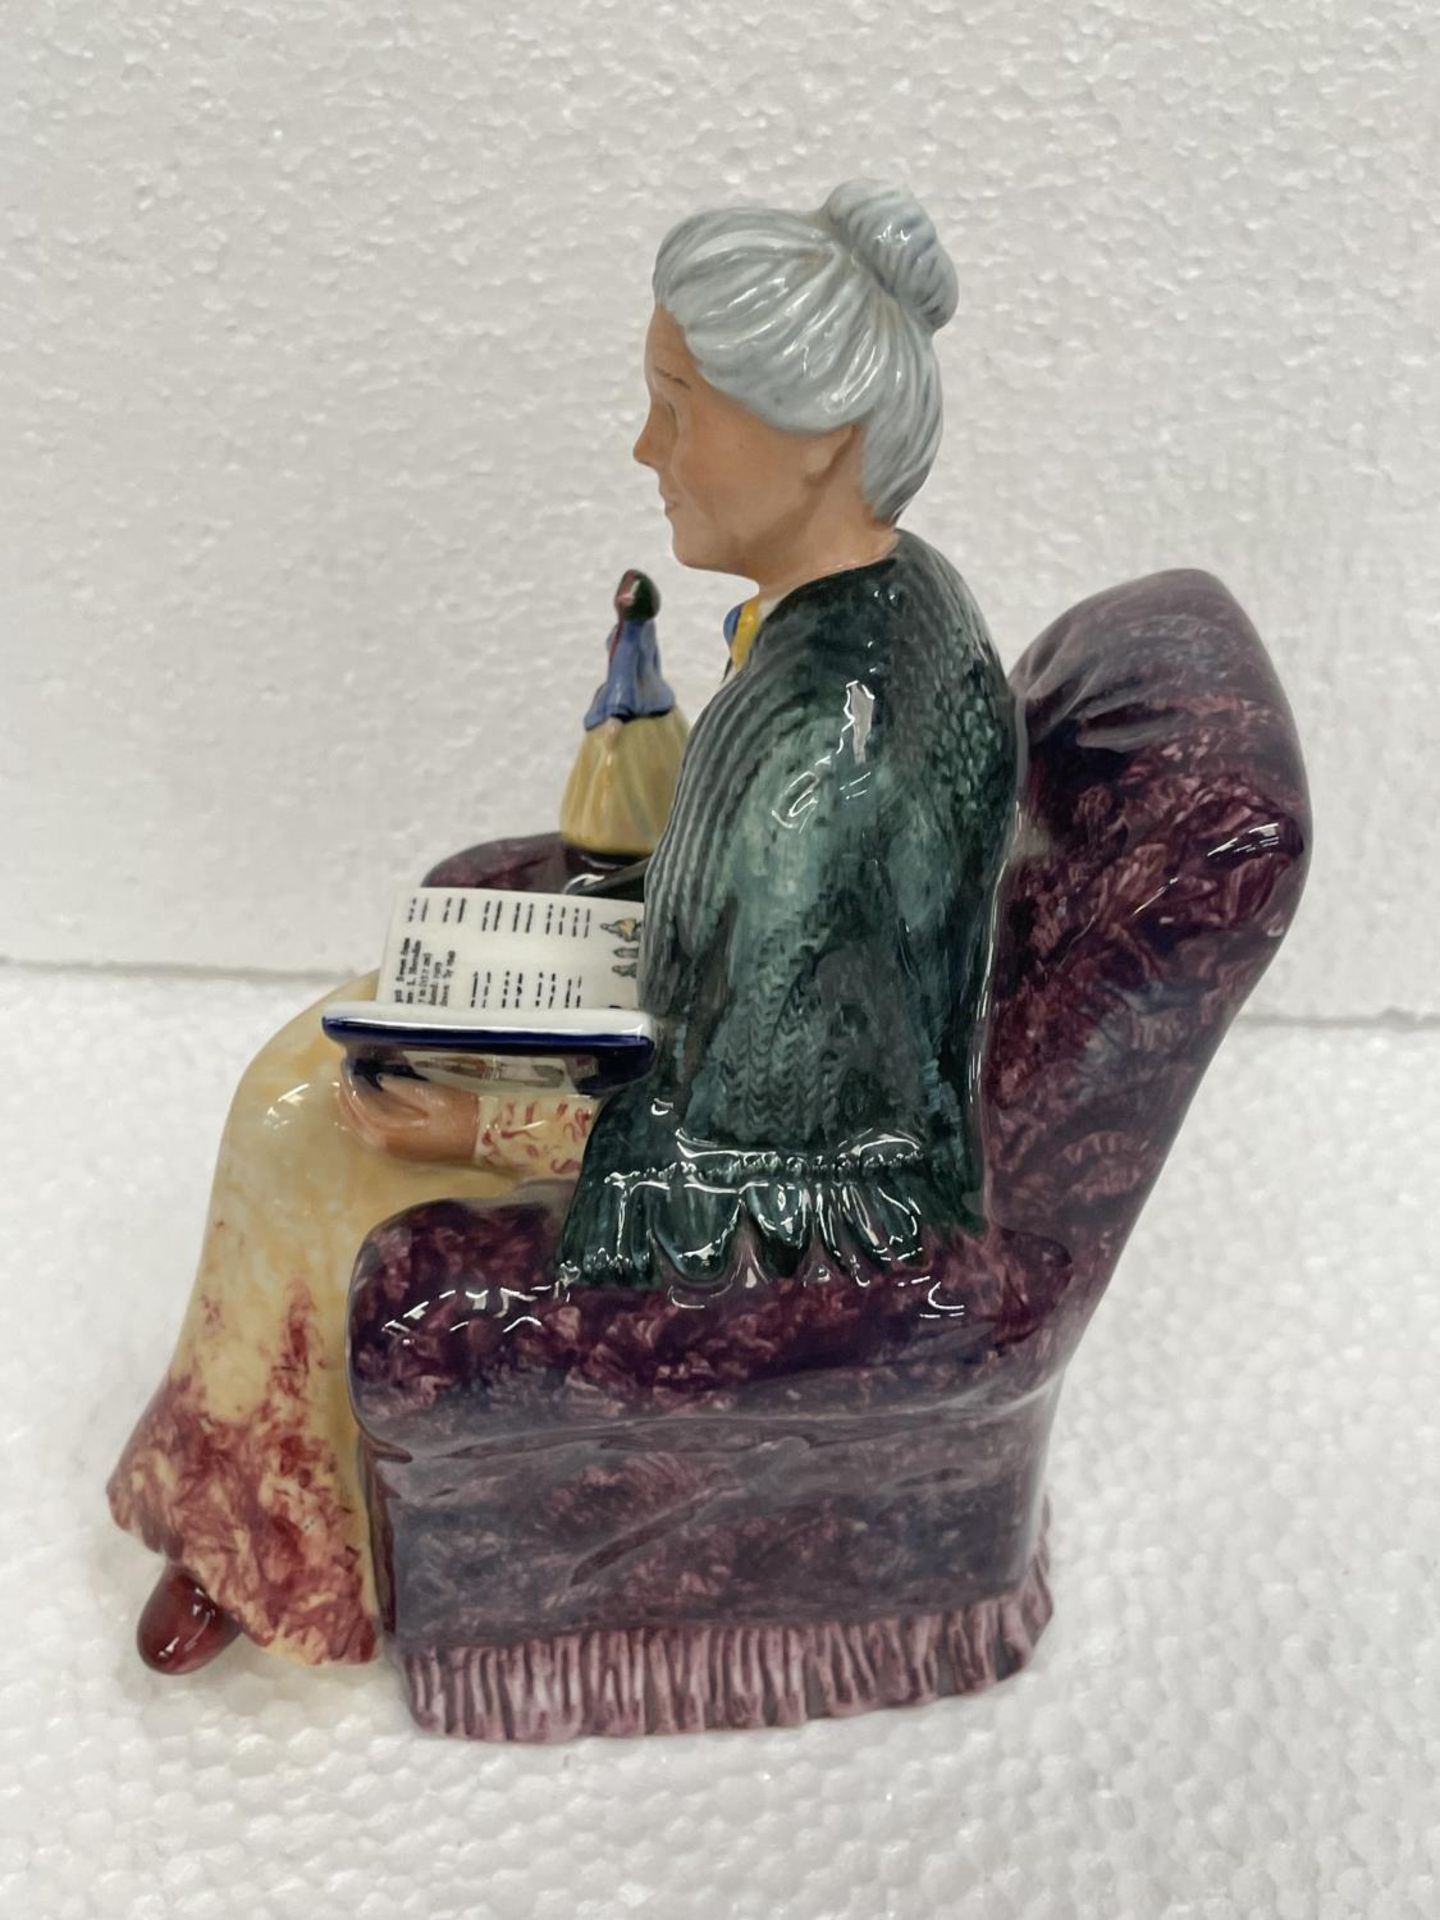 A ROYAL DOULTON FIGURE PRIZED POSSESSIONS HN2942 MADE EXCLUSIVELY FOR THE COLLECTORS CLUB - Image 2 of 5